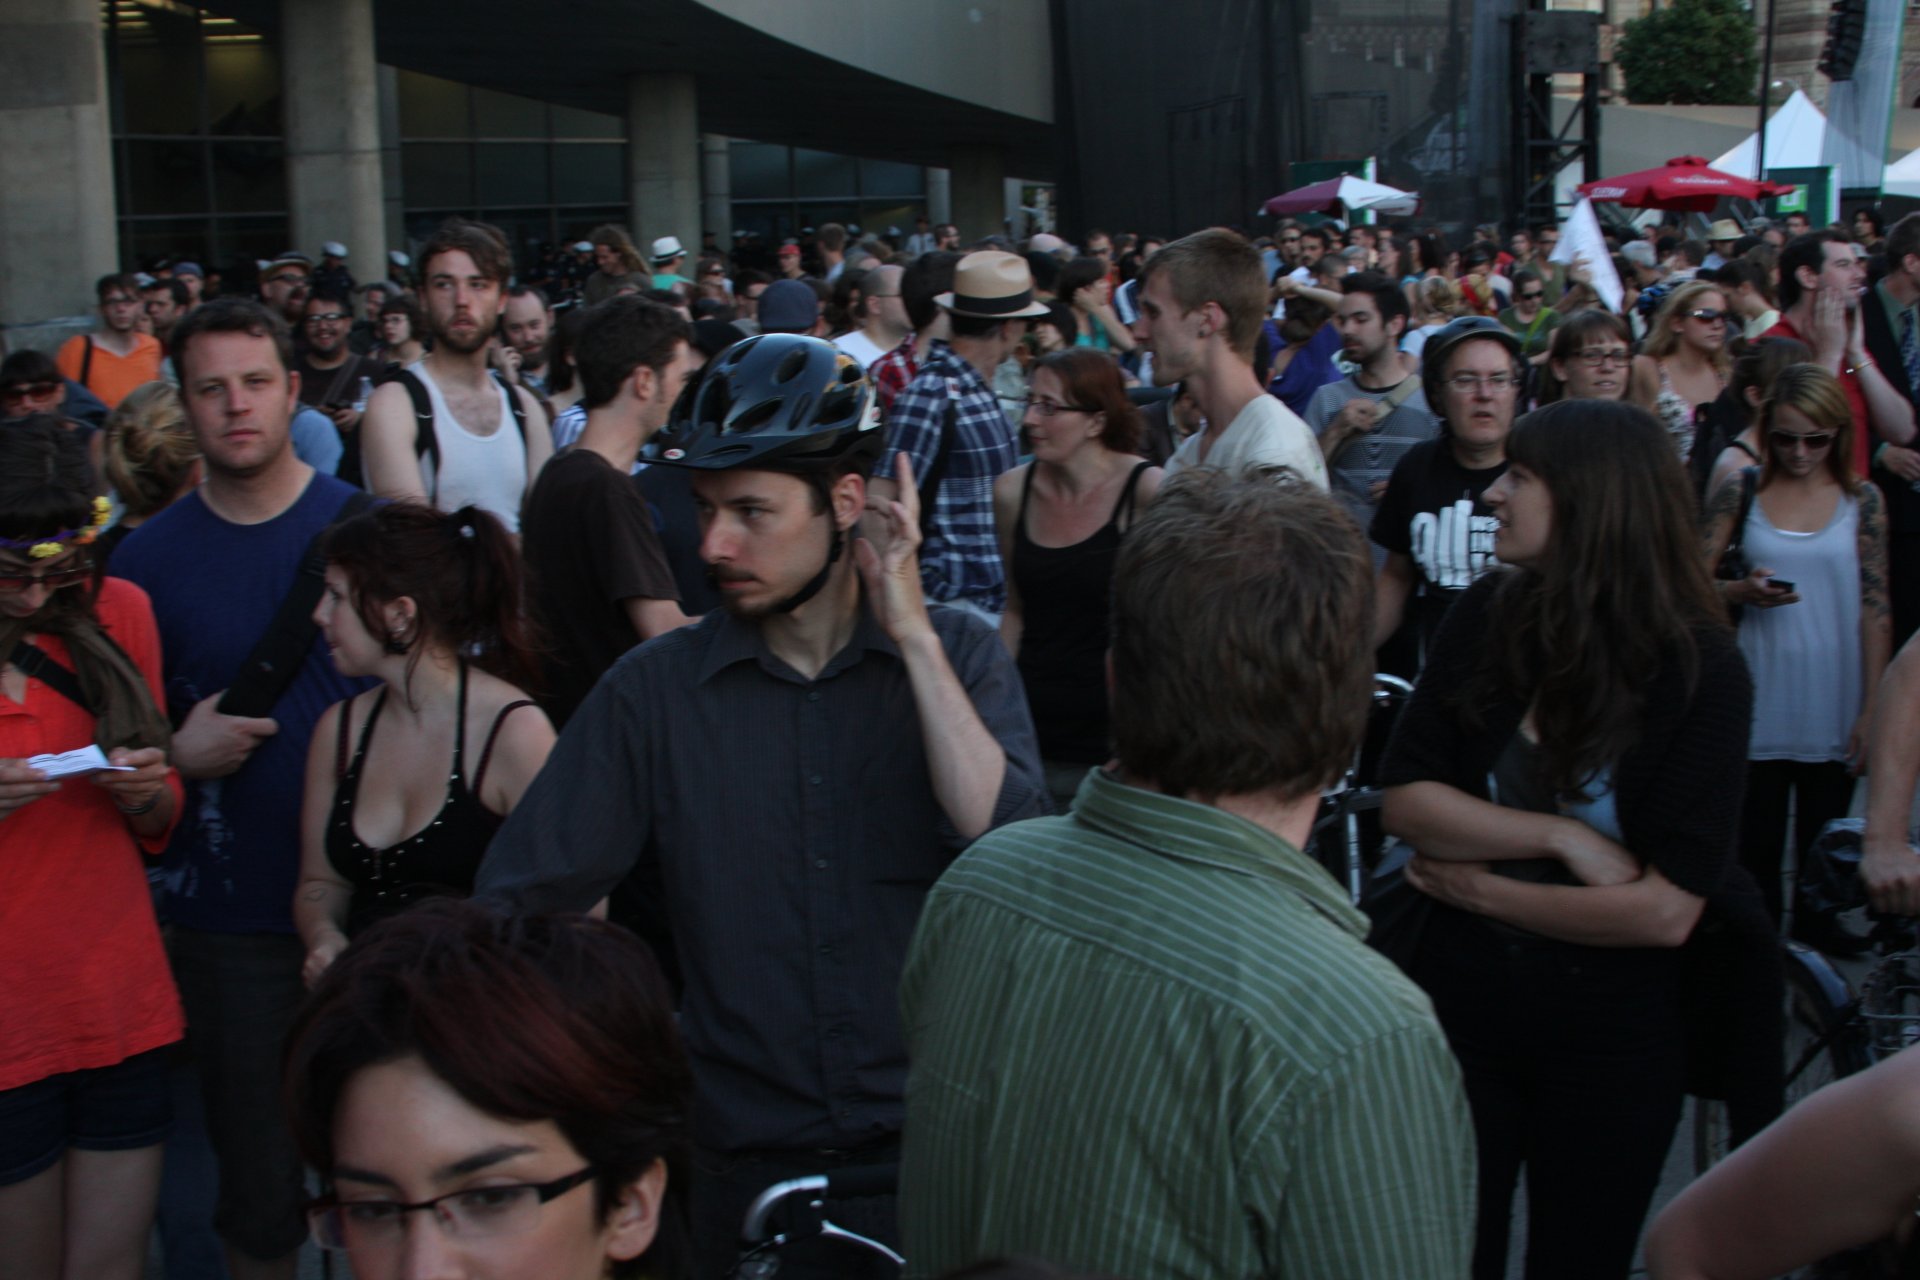 a large crowd of people walking around in the street